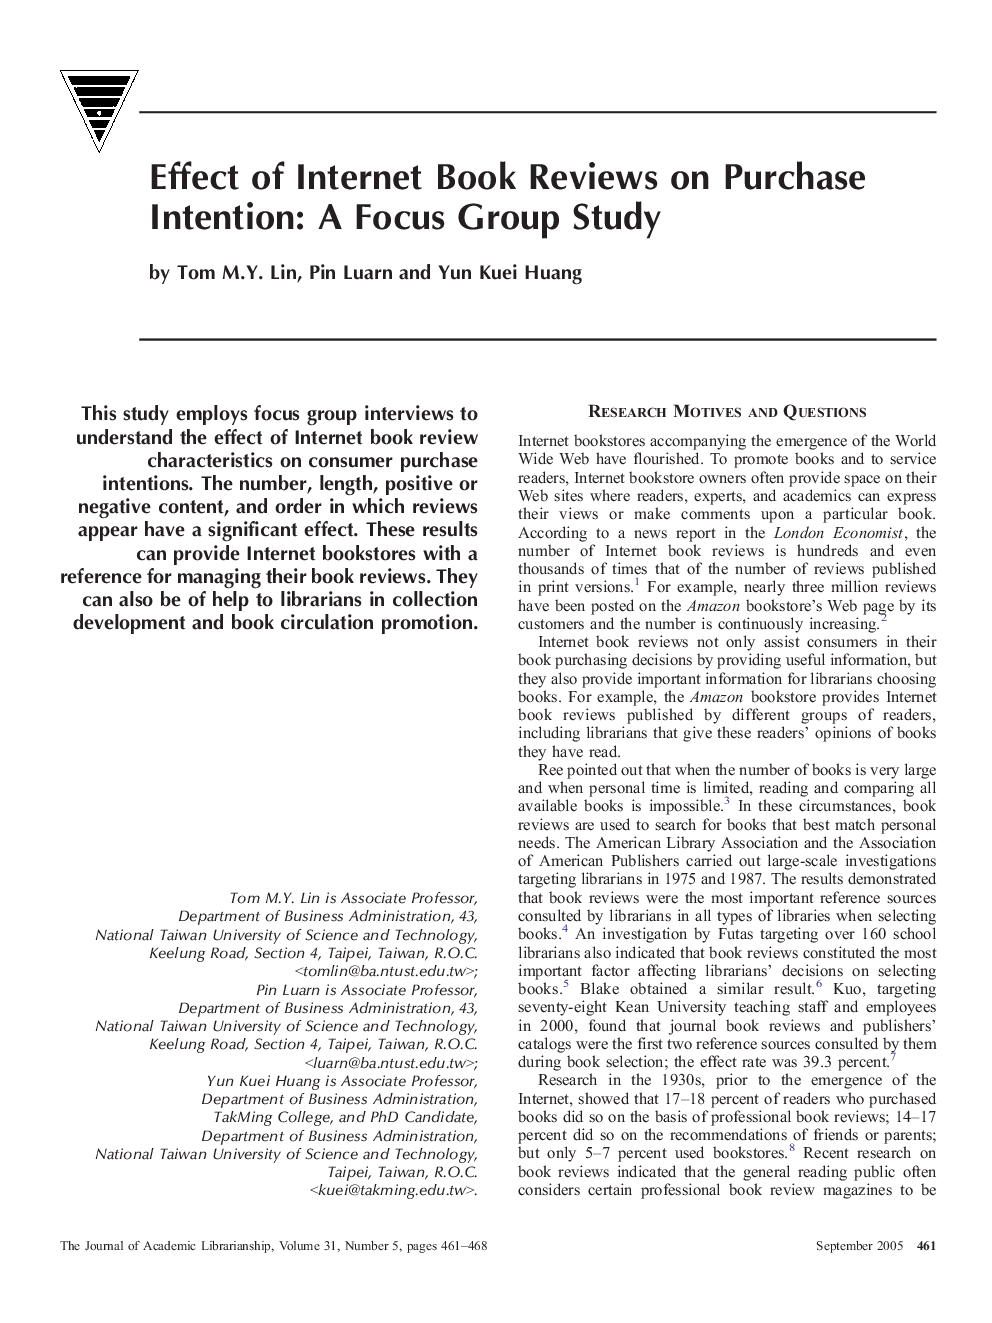 Effect of Internet Book Reviews on Purchase Intention: A Focus Group Study